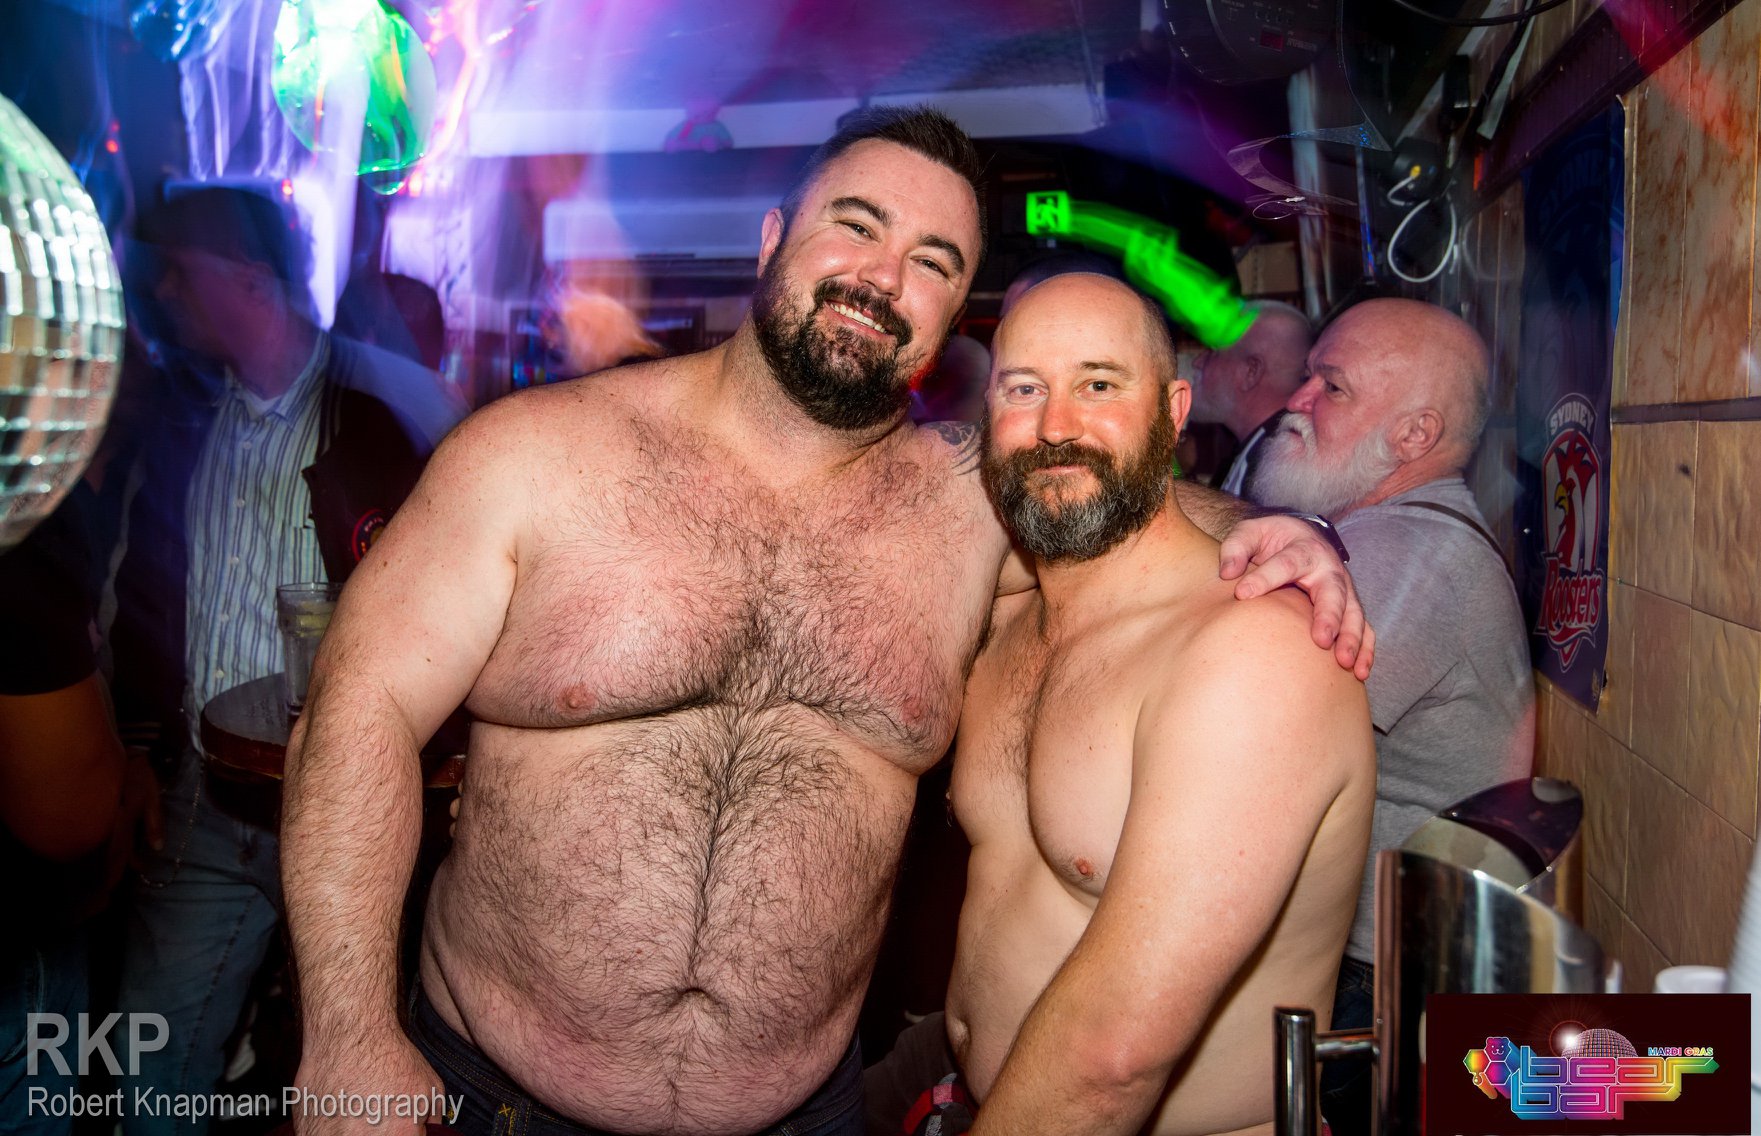 anita askew recommends dancing bear bachelor party pic